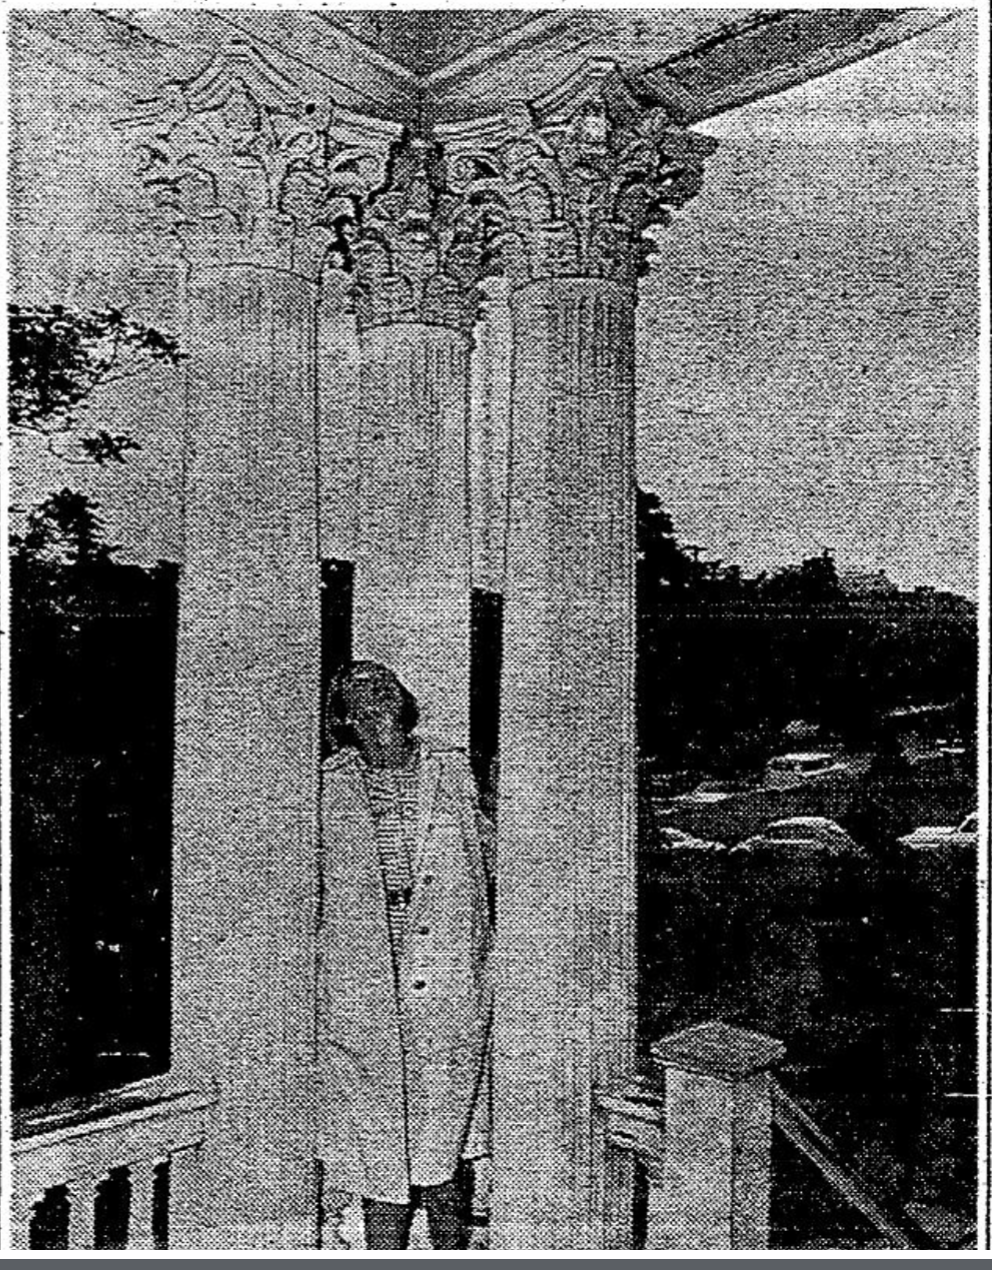 This is a 1966 pic of Corinthian columns at the Count Creighton House at N. 20th and Chicago Streets in Omaha, Nebraska, from 1867 to 1966. Pic from the Omaha World-Herald.